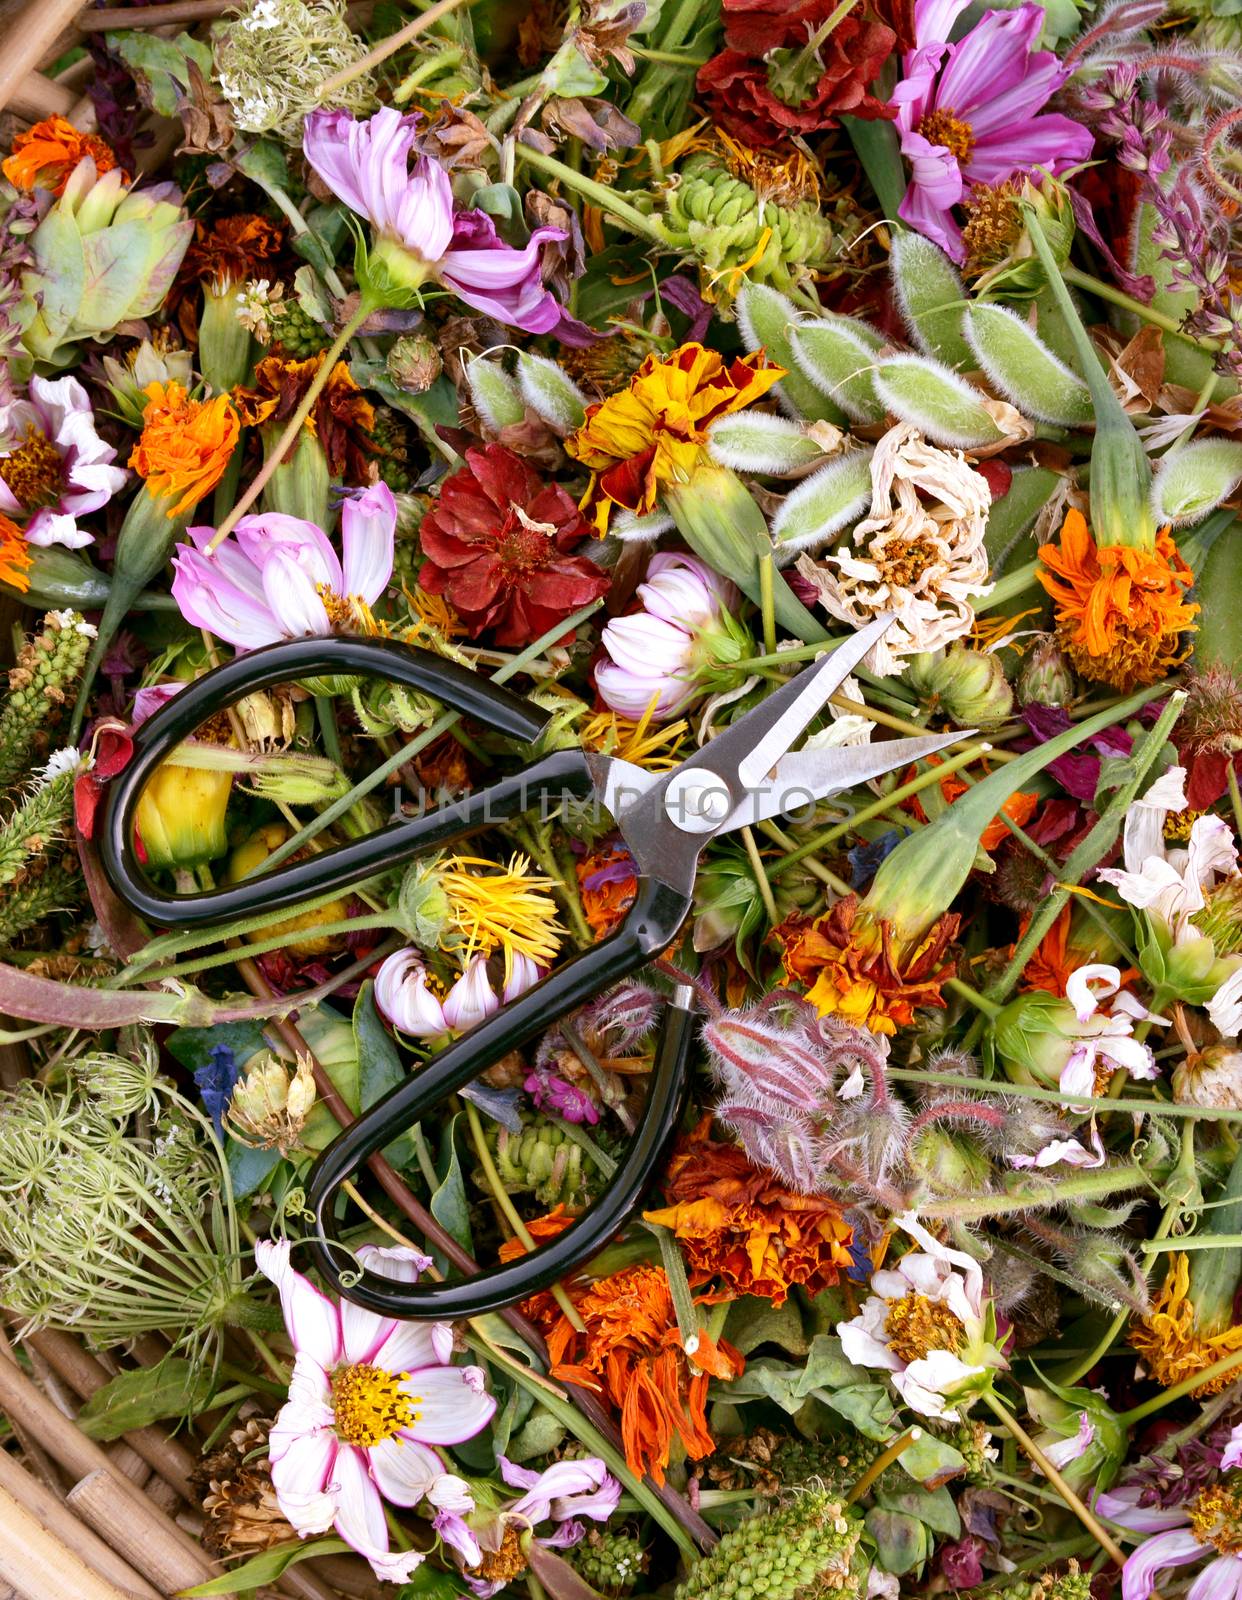 Sharp retro florist scissors on a bed of faded flower heads - cosmos, marigolds and seed pods